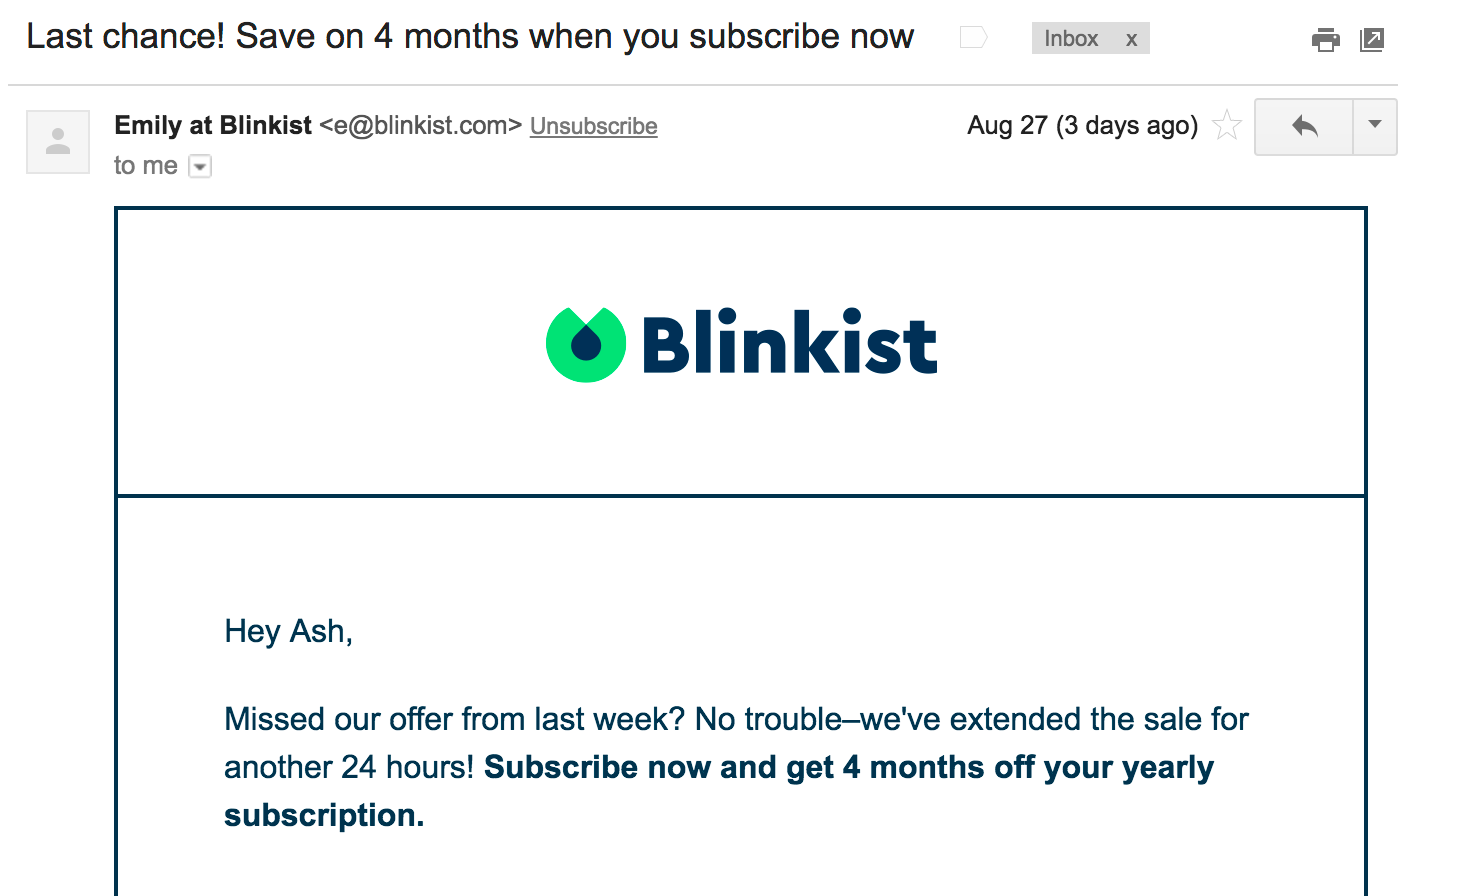 Best Email Subject Lines: Screenshot of email from Blinkist